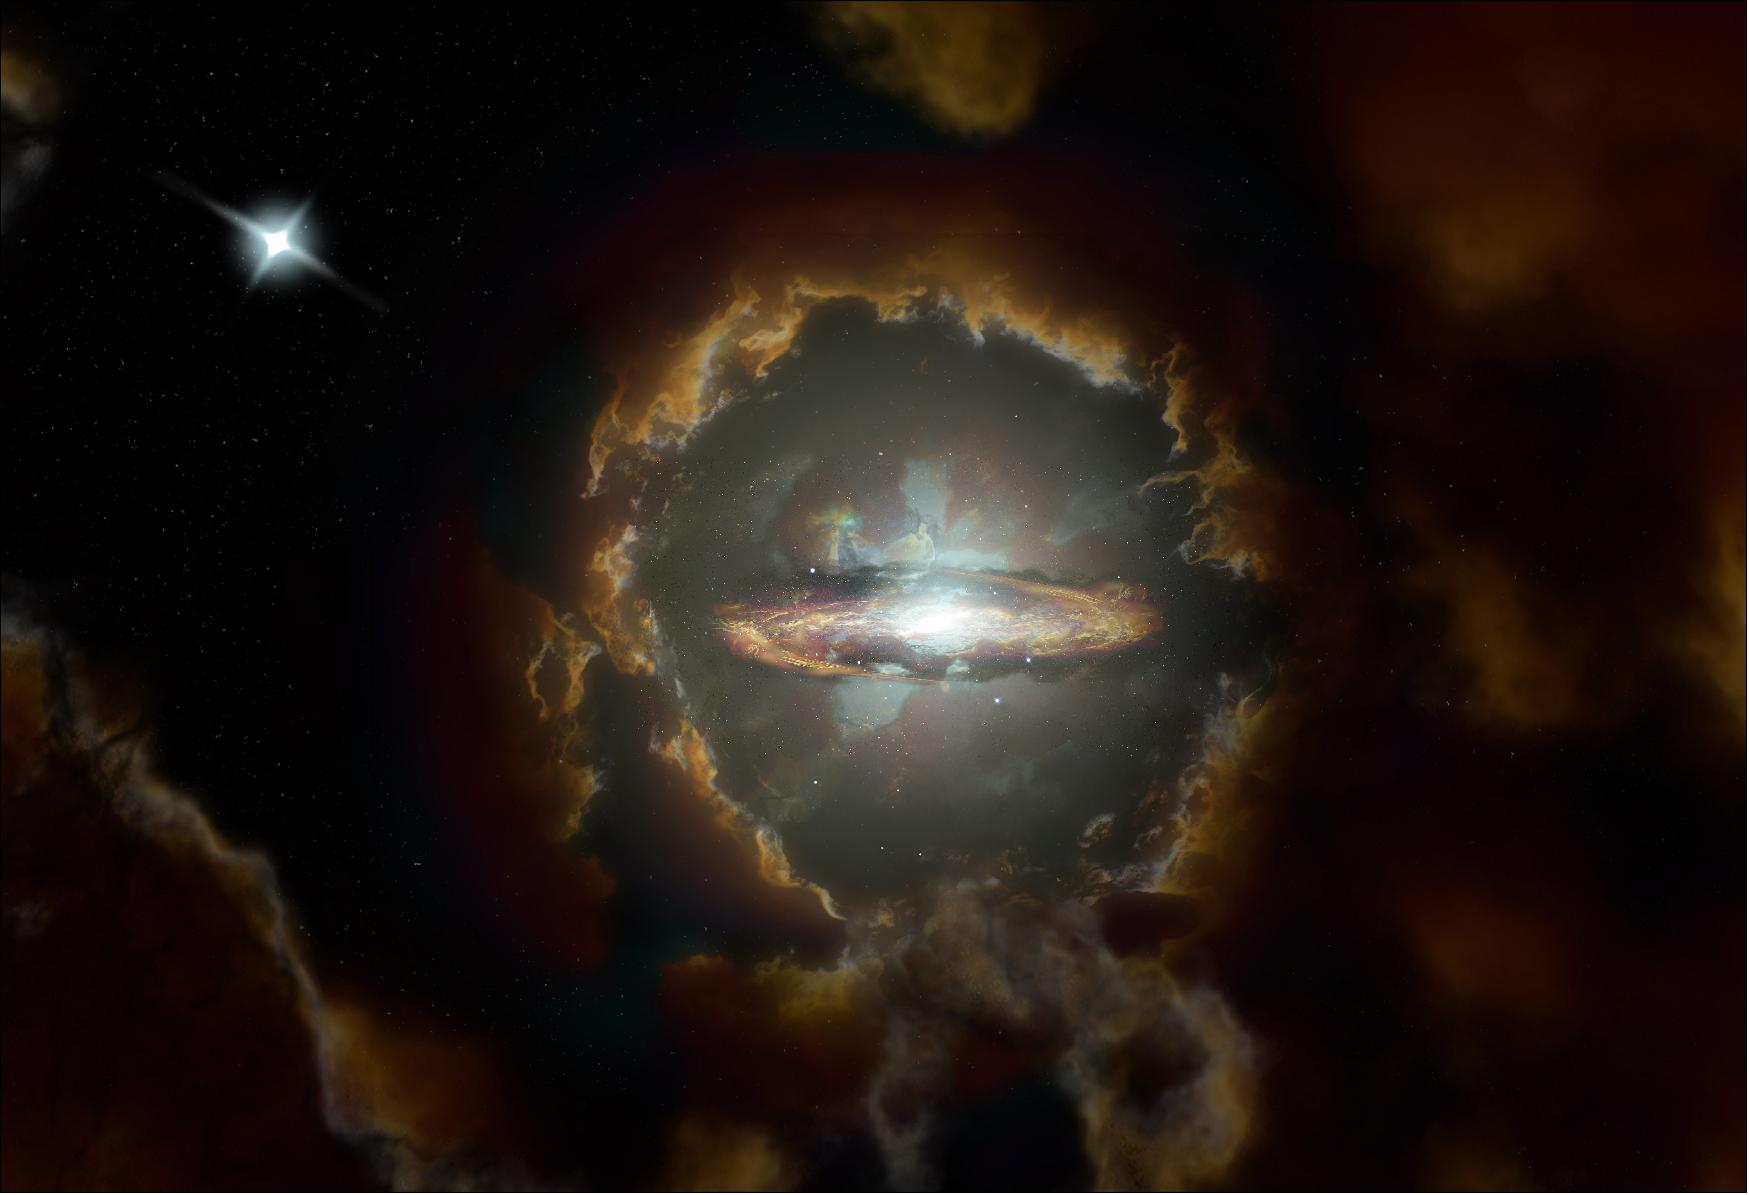 Figure 63: Artist's impression of the Wolfe Disk, a massive rotating disk galaxy in the early, dusty universe. The galaxy was initially discovered when ALMA examined the light from a more distant quasar (top left), image credit: NRAO/AUI/NSF, S. Dagnello